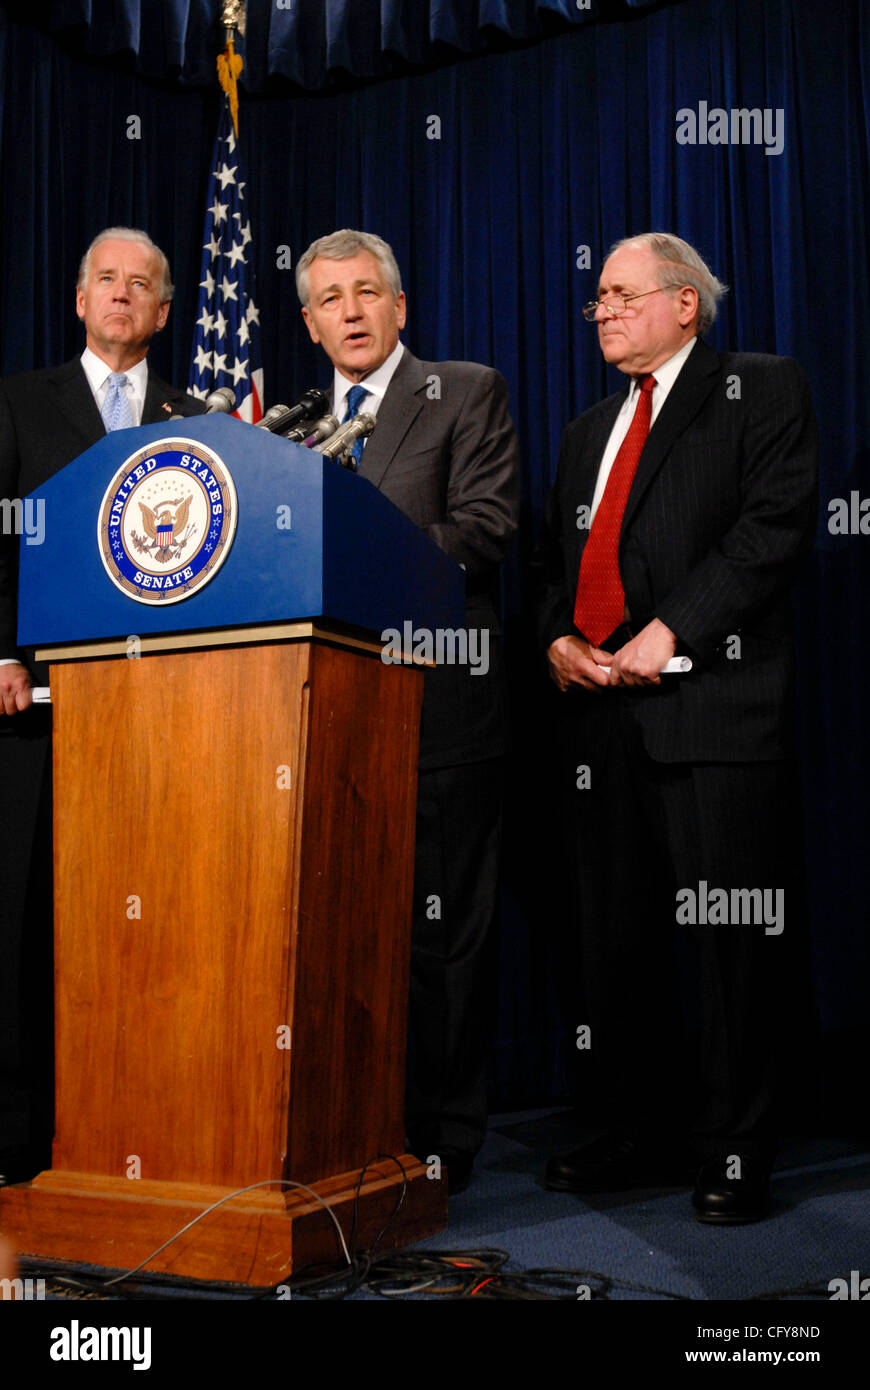 Jan 17, 2007; Washington, DC, USA; Senators CARL LEVIN (D-MI), JOESPH BIDEN (D-DE) and CHUCK HAGEL (R-NE) announce a resolution stating opposition to President George W. Bush's escalation of US troops in the Iraq War. The resolution was co-authored by all three Senators.  Mandatory Credit: Photo by  Stock Photo